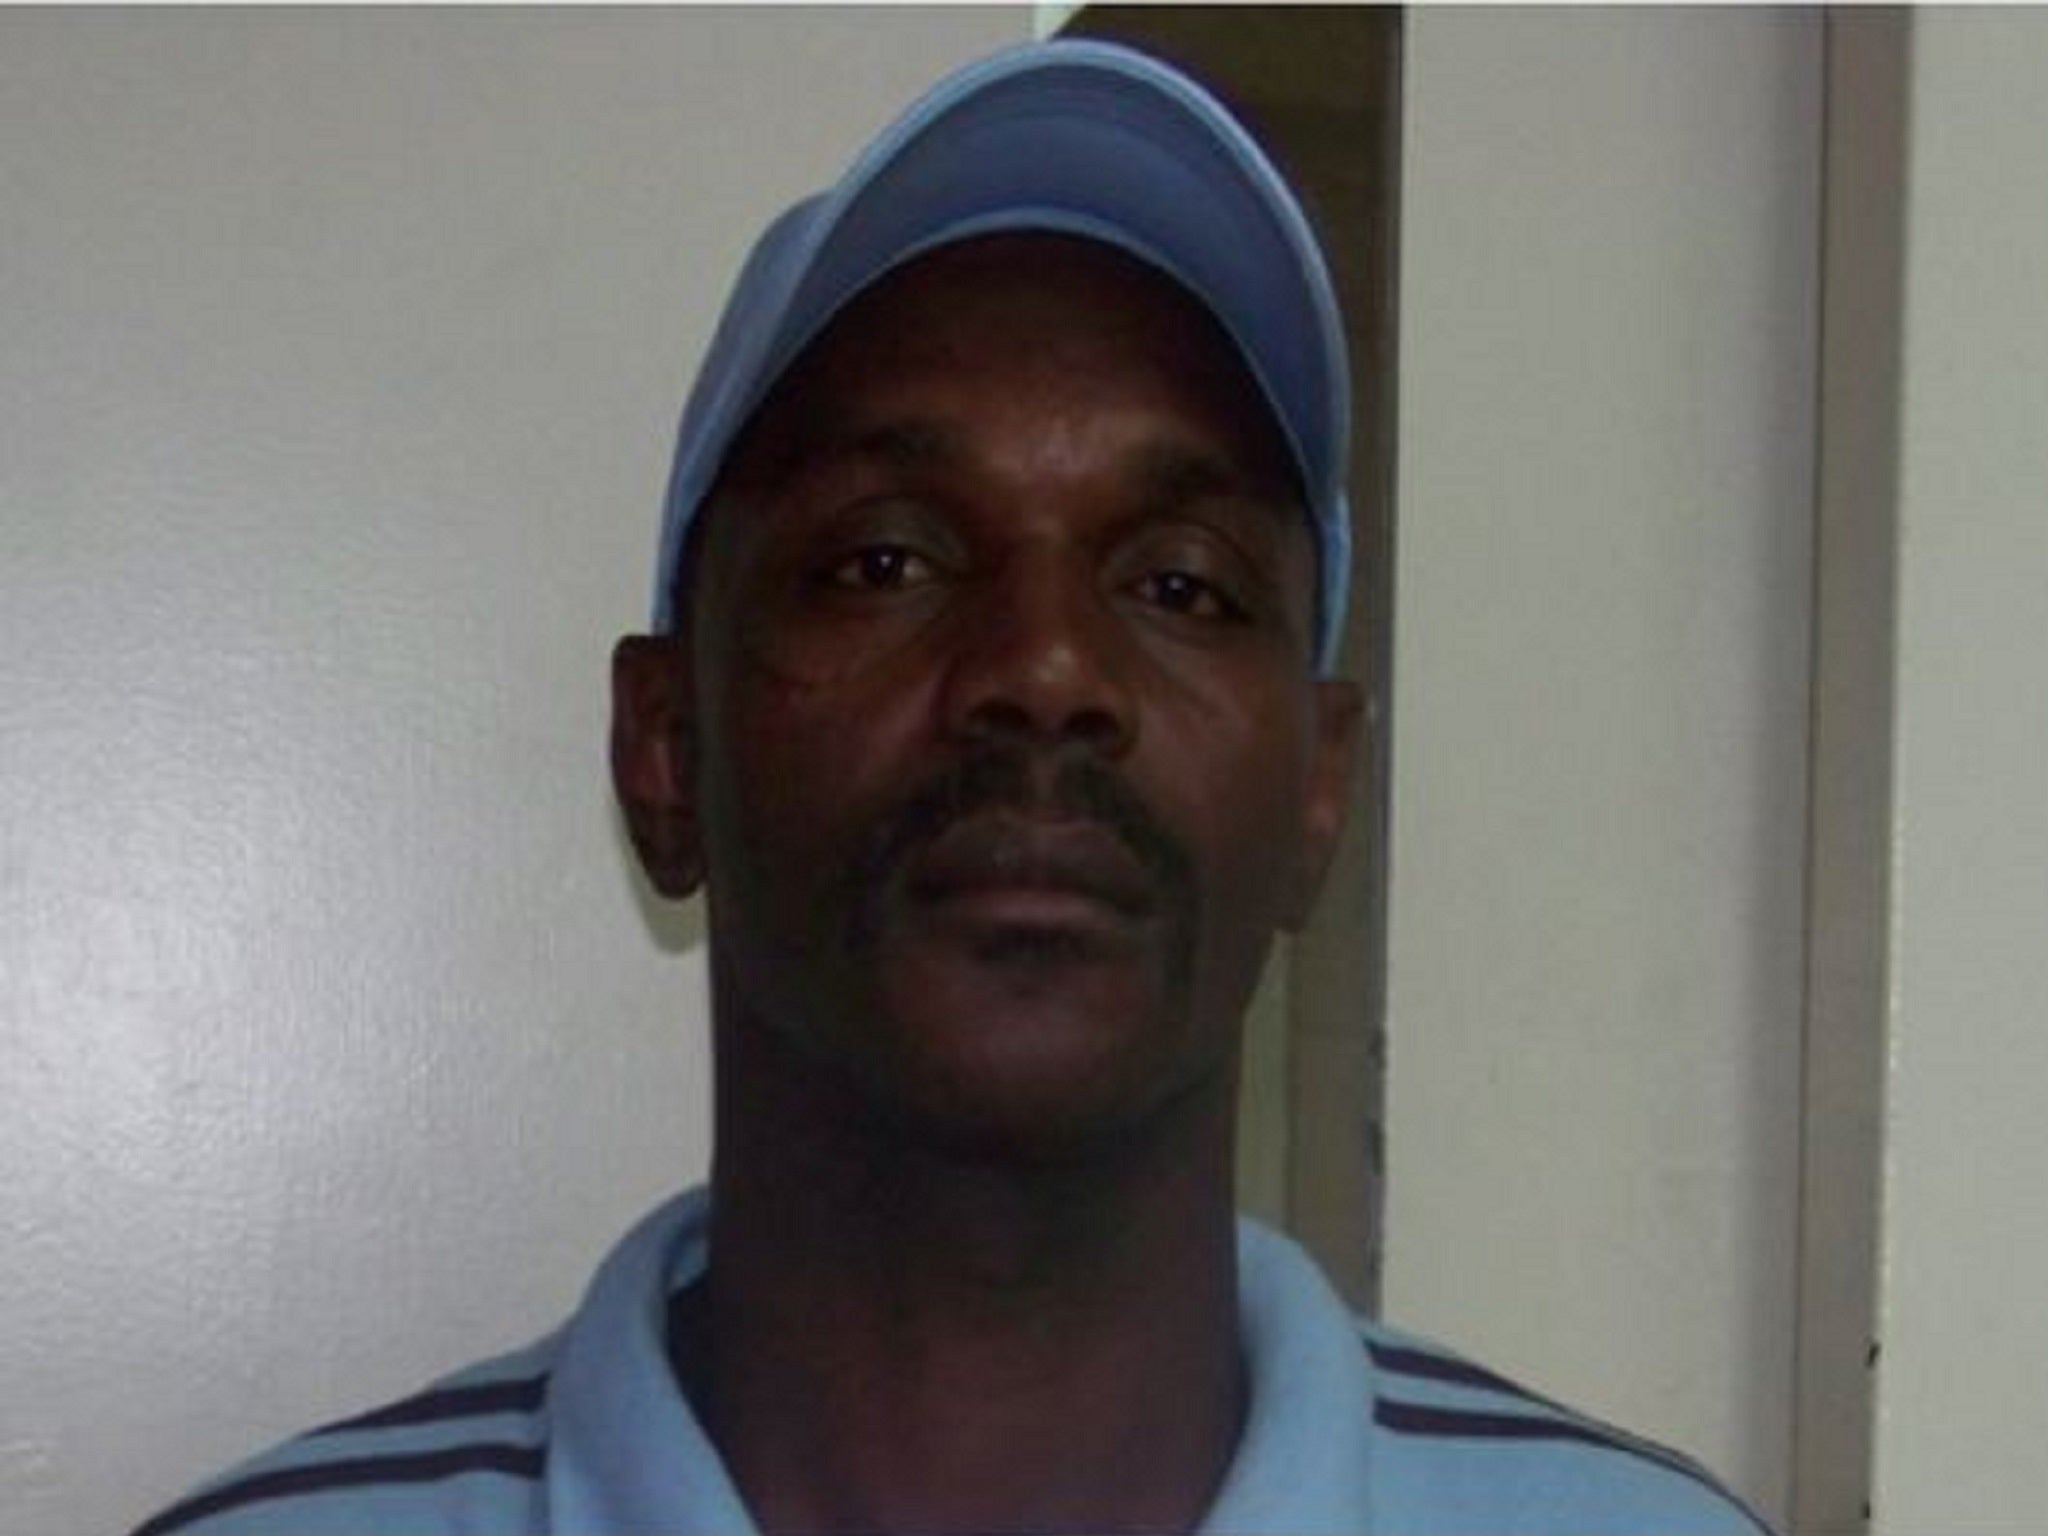 The body was that of Otis Byrd, from Port Gibson, Mississippi